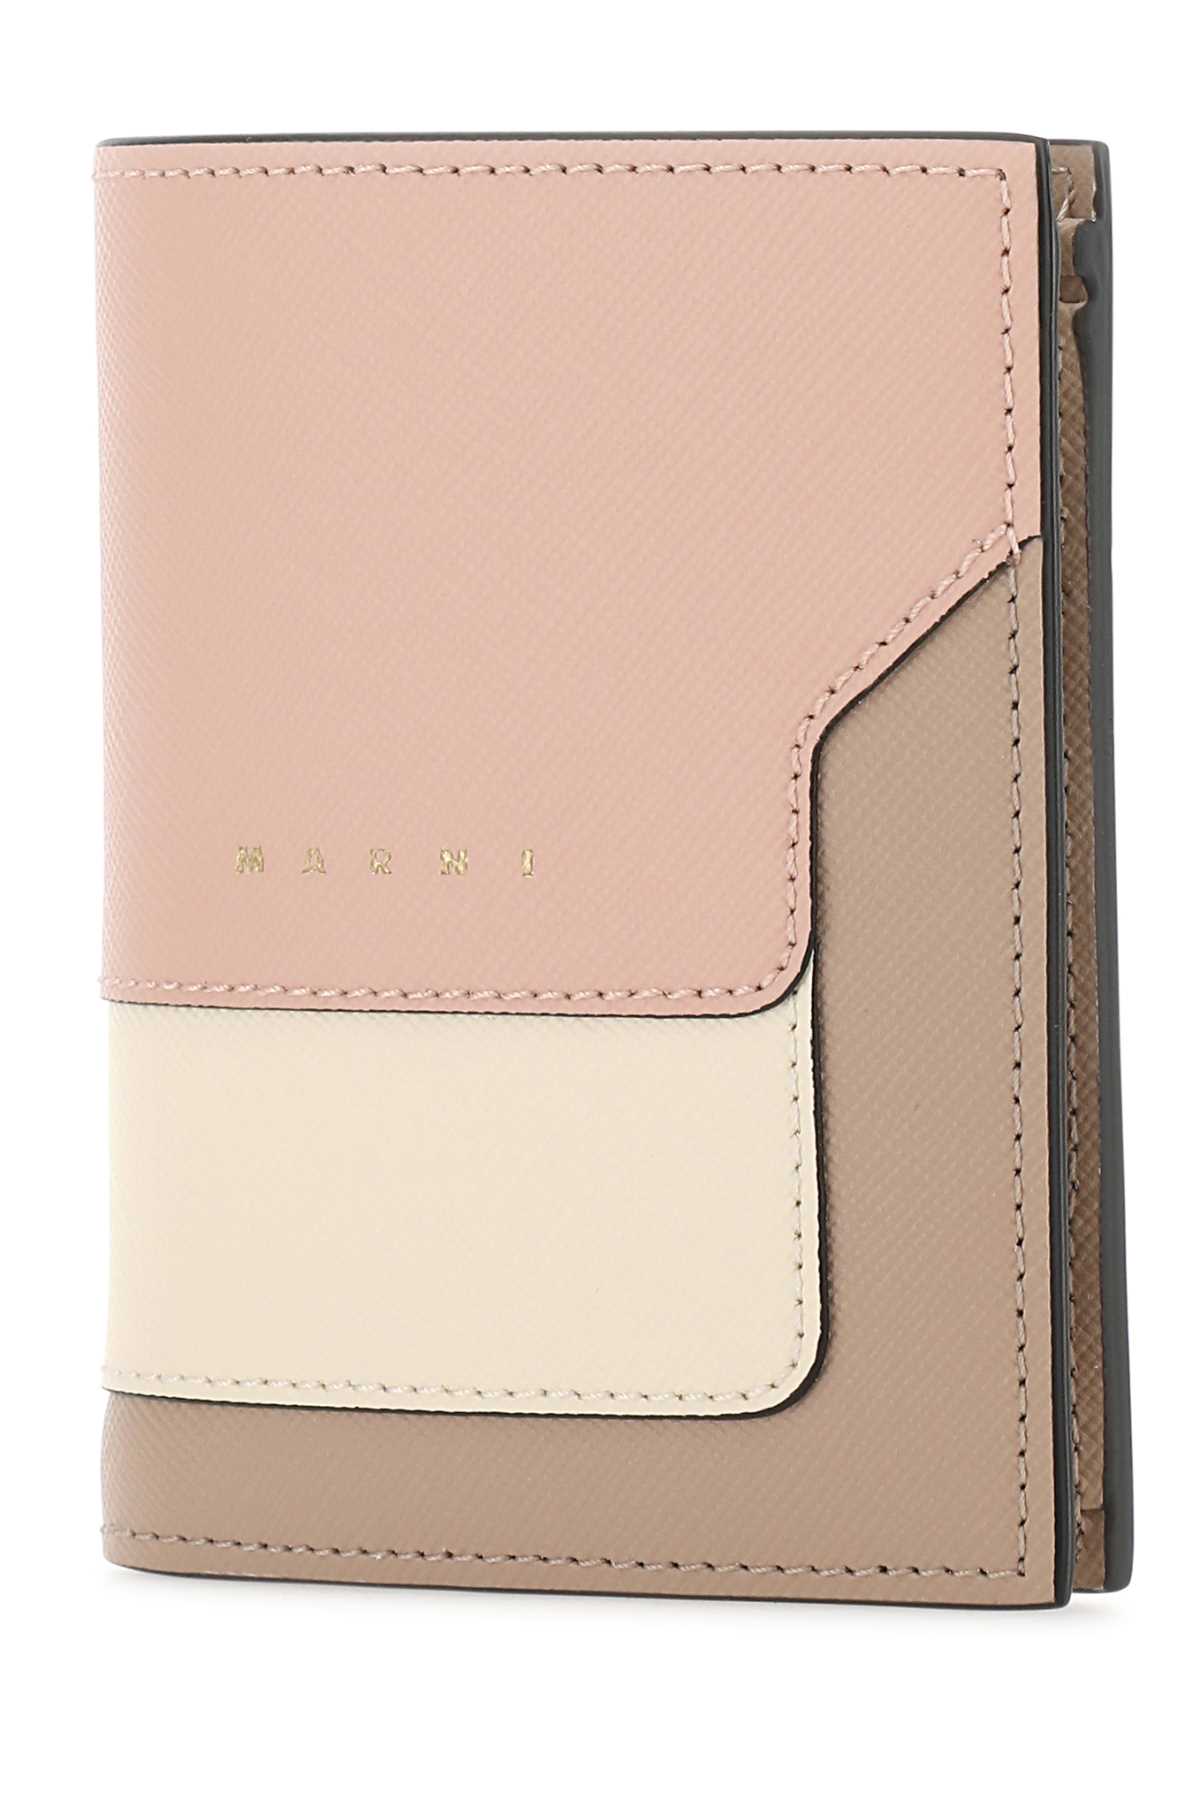 Marni Multicolor Leather Wallet In Z605m